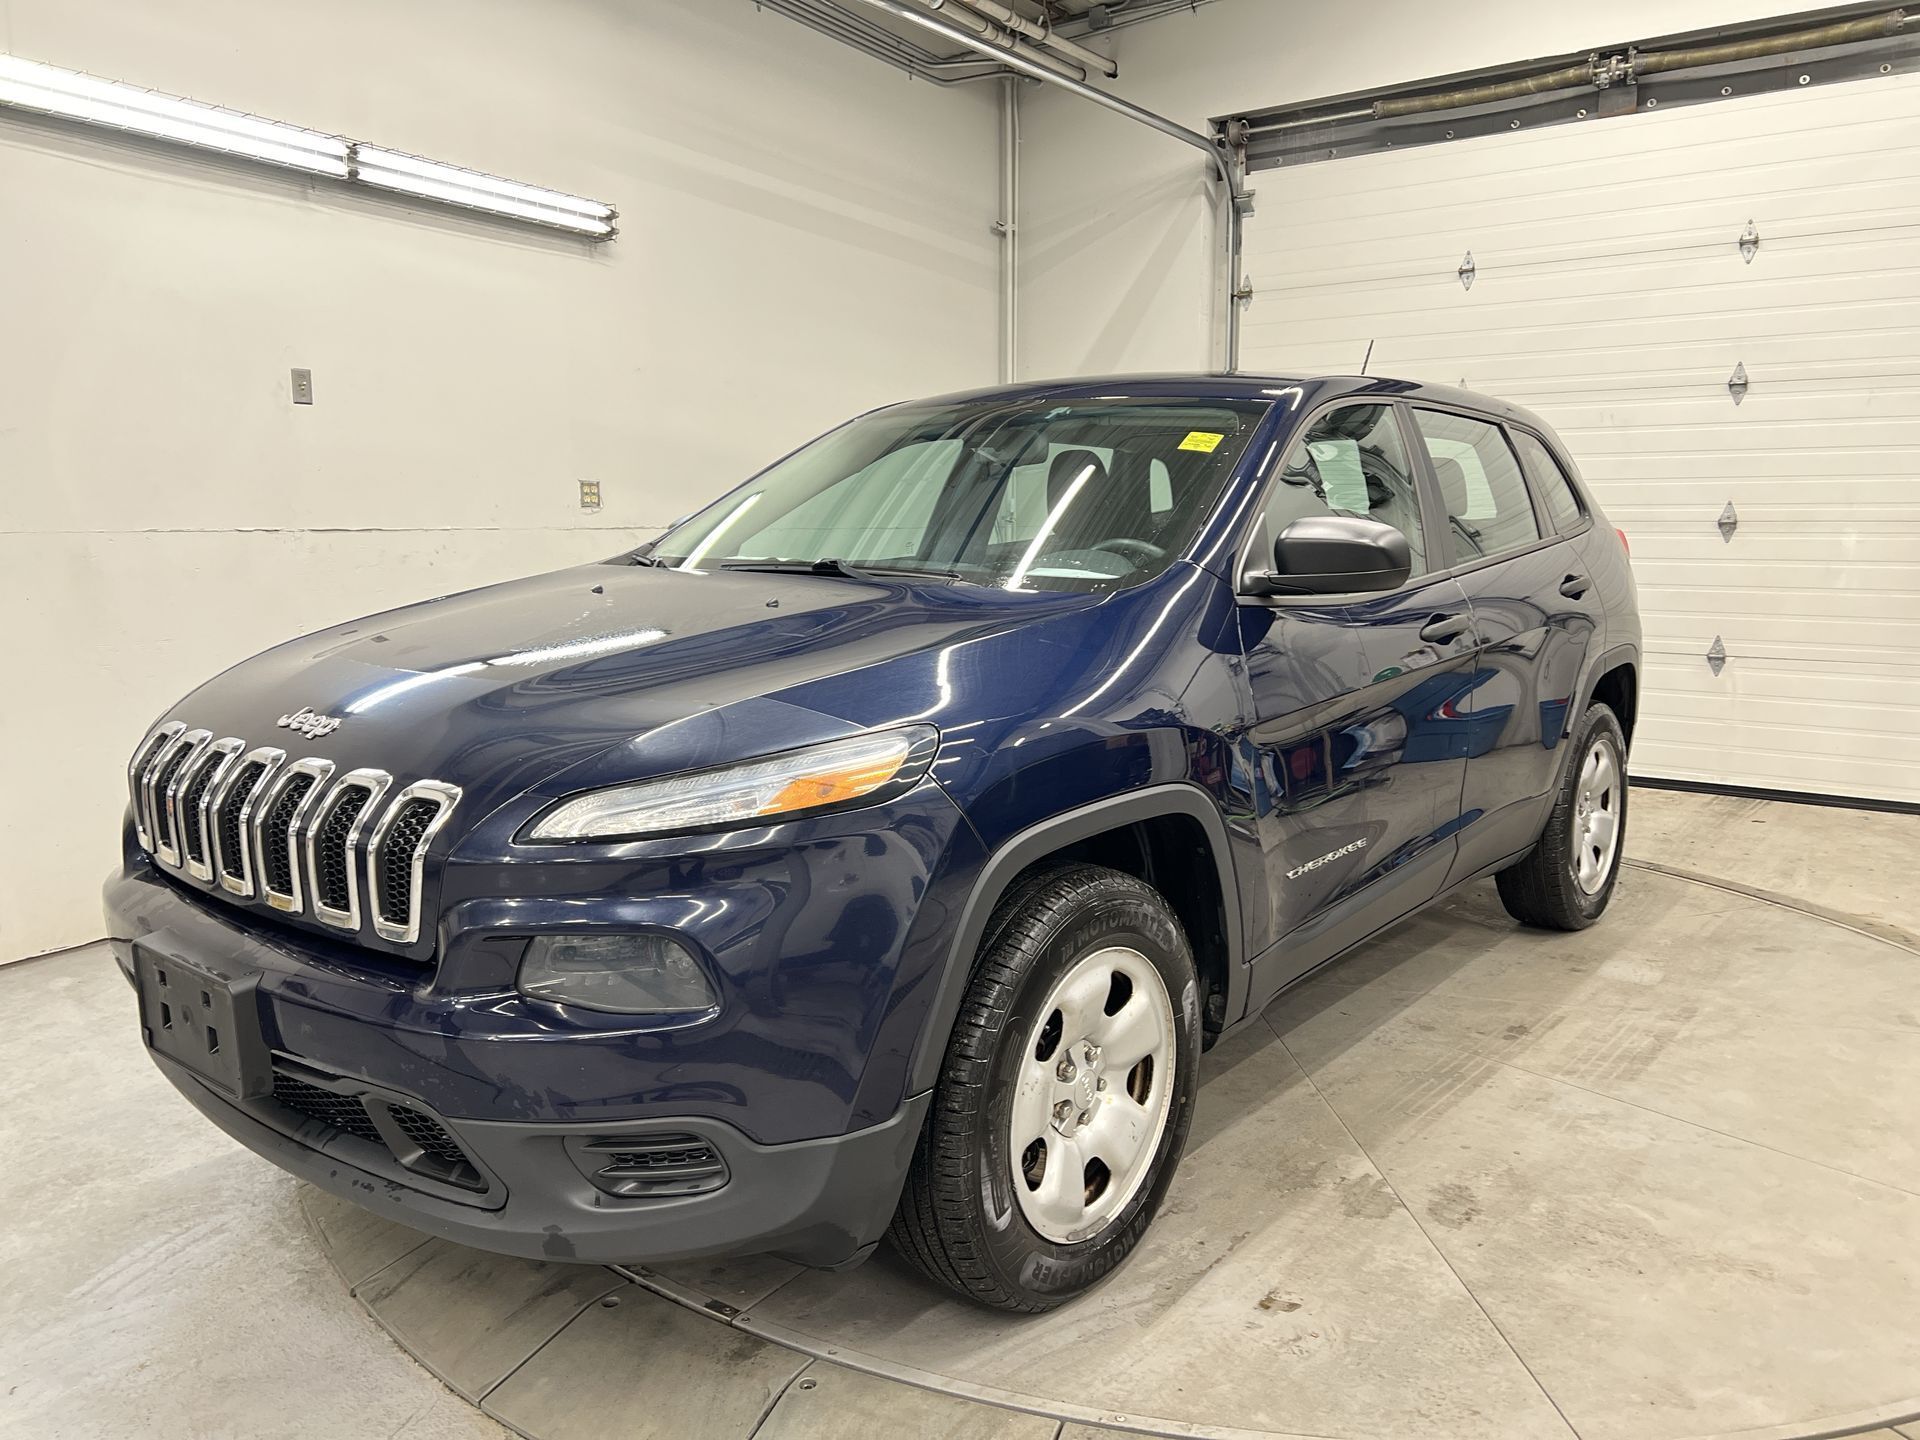 2014 Jeep Cherokee 4x4 | 3.2L V6 | BLUETOOTH | LOW KMS! | CERTIFIED!